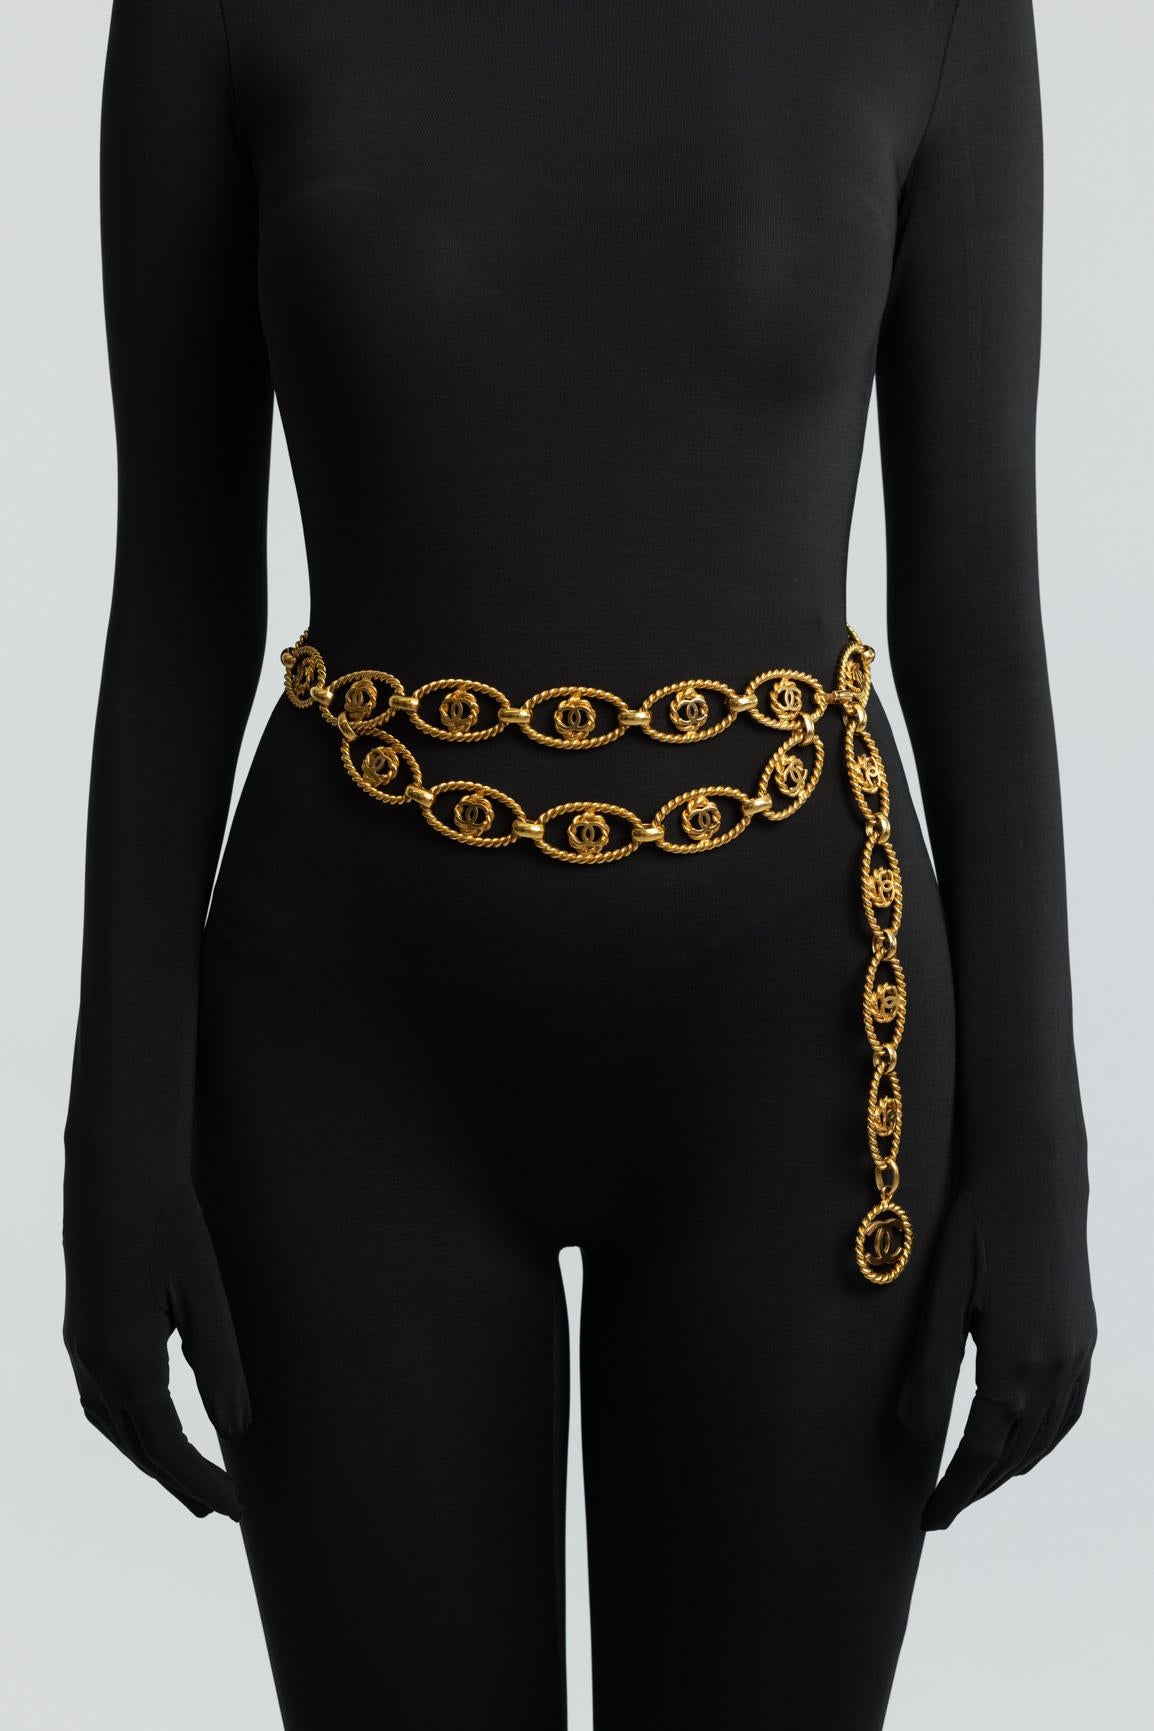 Chanel Gold Coco CC Logo Oval Twist Chain Rope Belt (35 Inch) For Sale 3